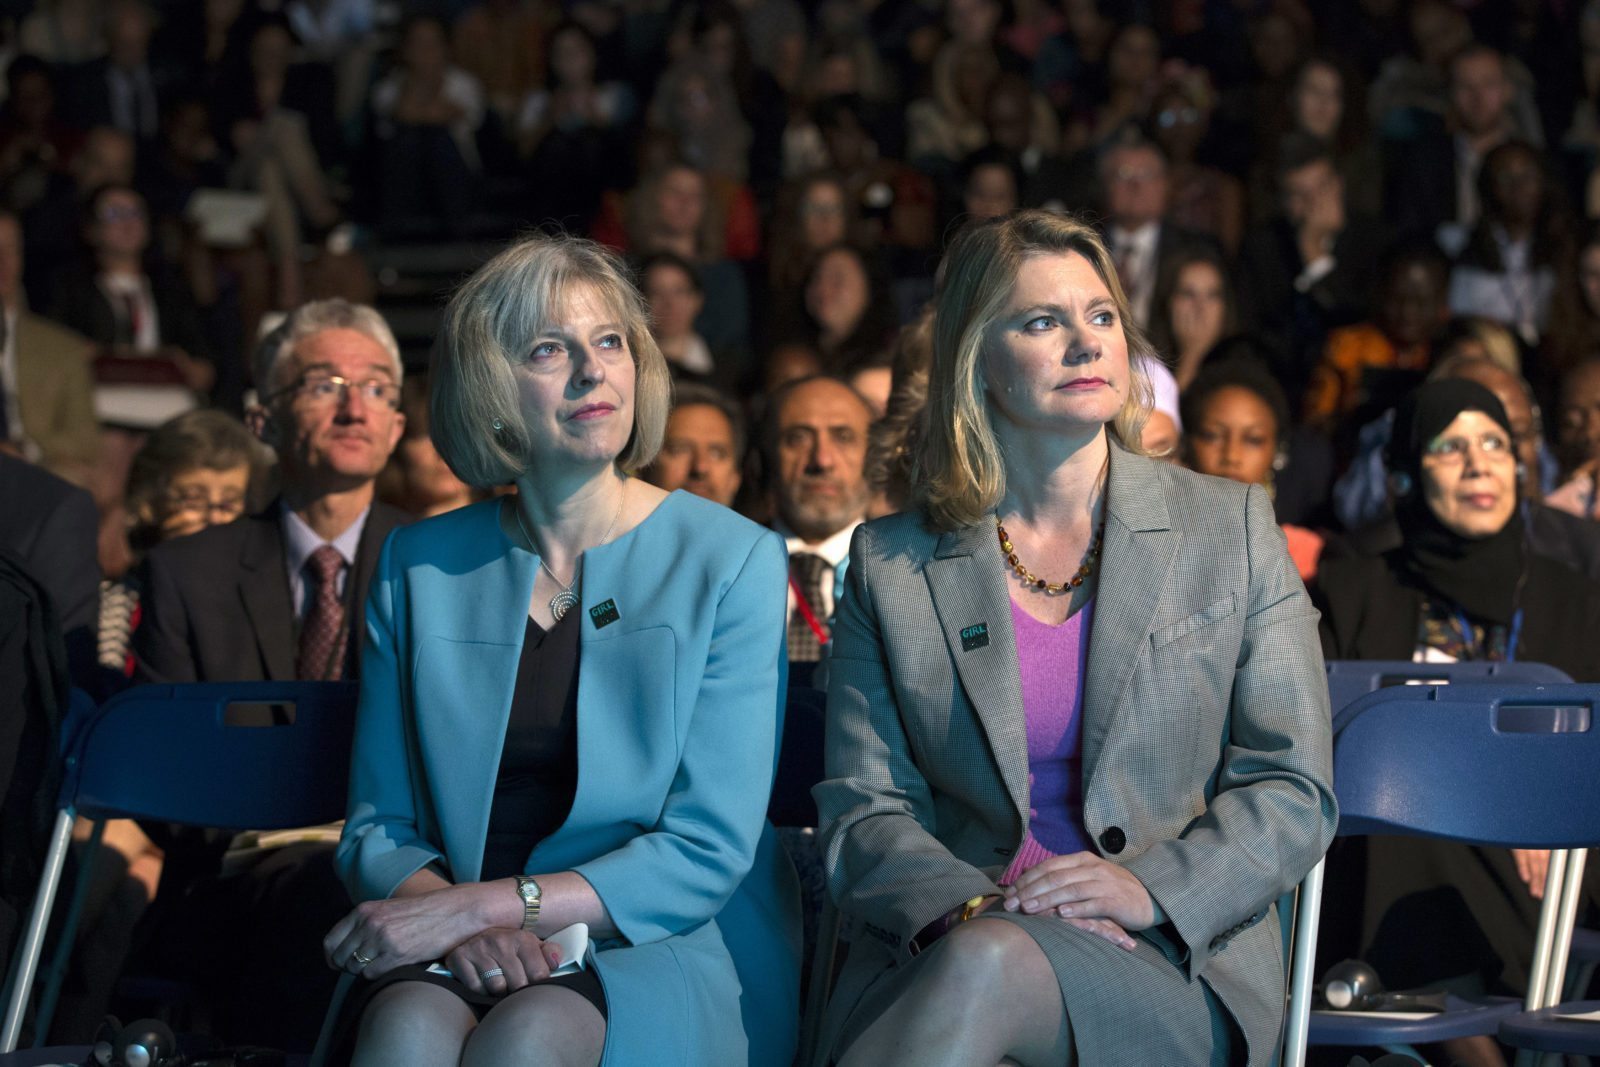 Theresa May and Justine Greening (Photo by Oli Scarff/Getty Images)